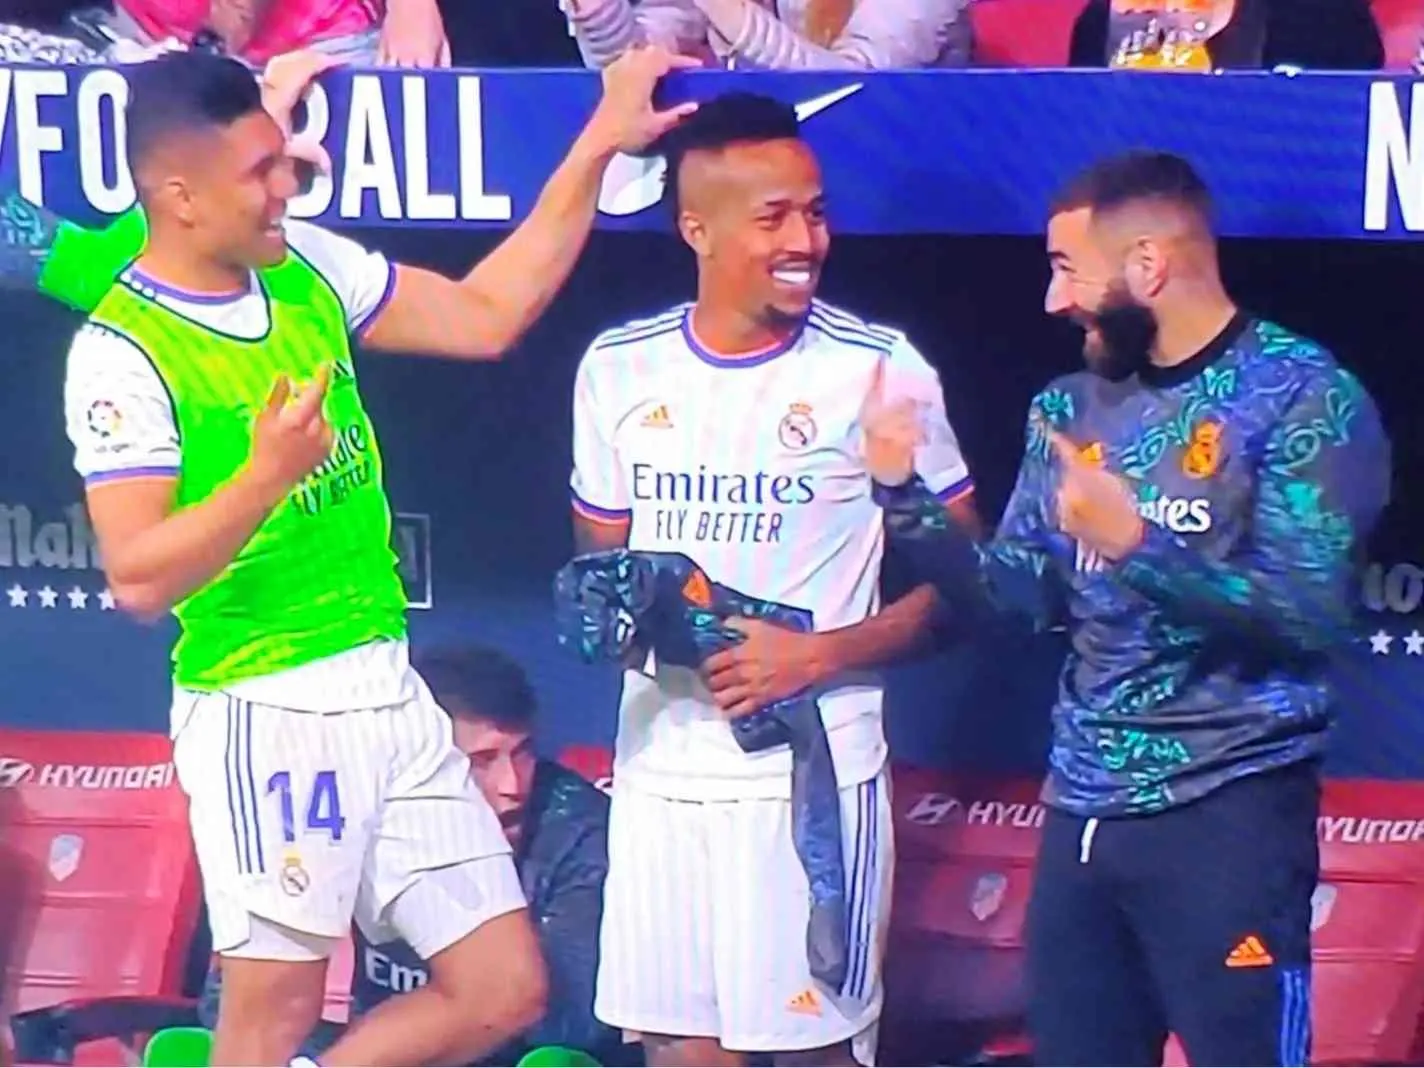 The image shows Casemiro, Militao and Benzema having a laugh at the bench towards the end of Real Madrid's derby loss against Atletico.